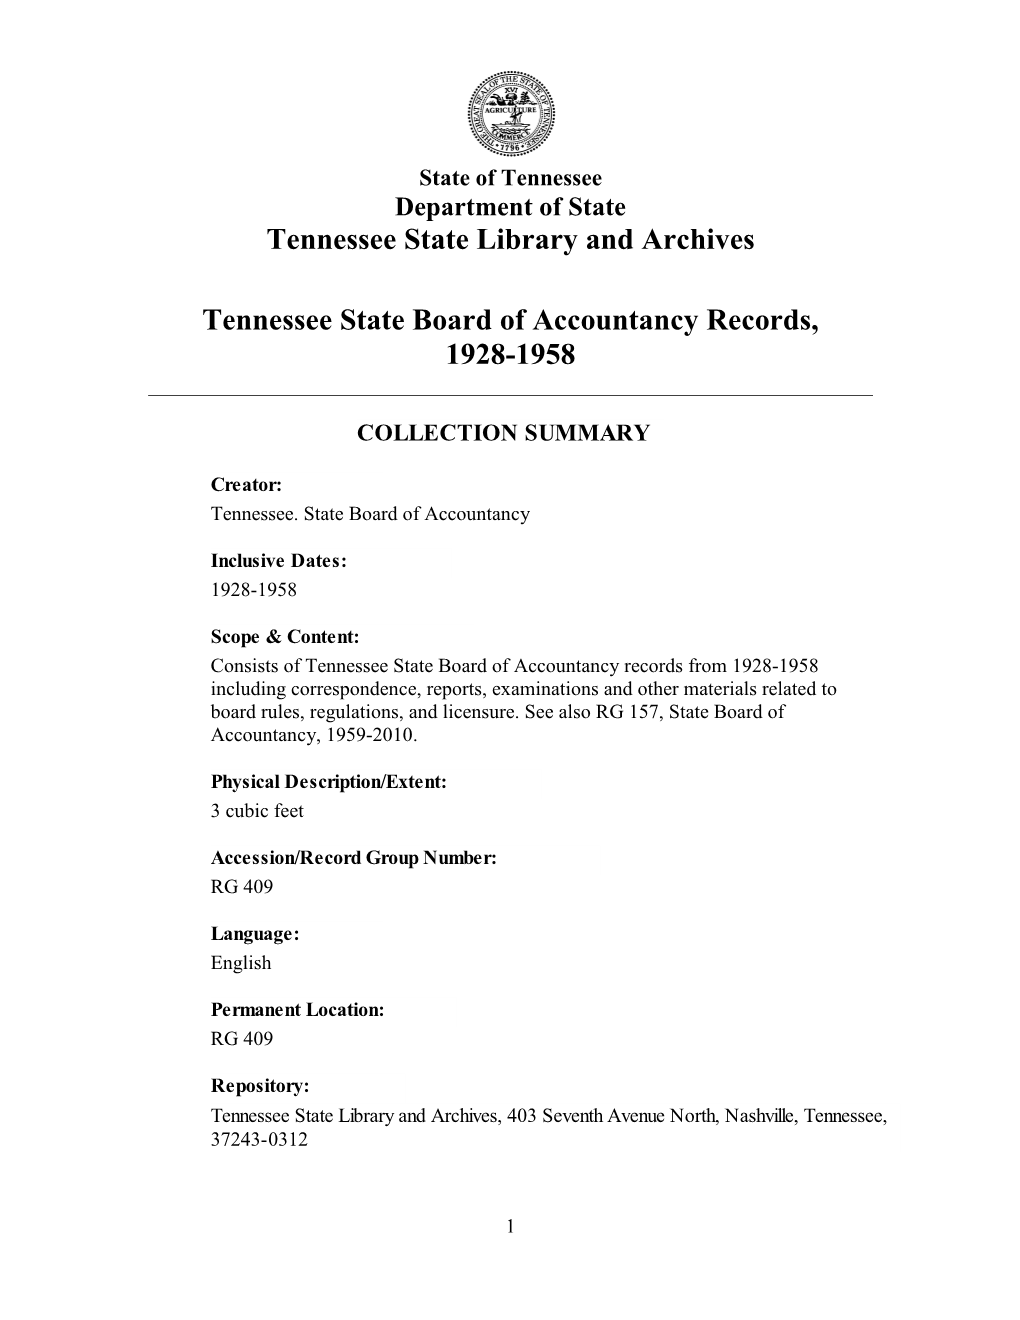 Tennessee State Board of Accountancy Records, 1928-1958